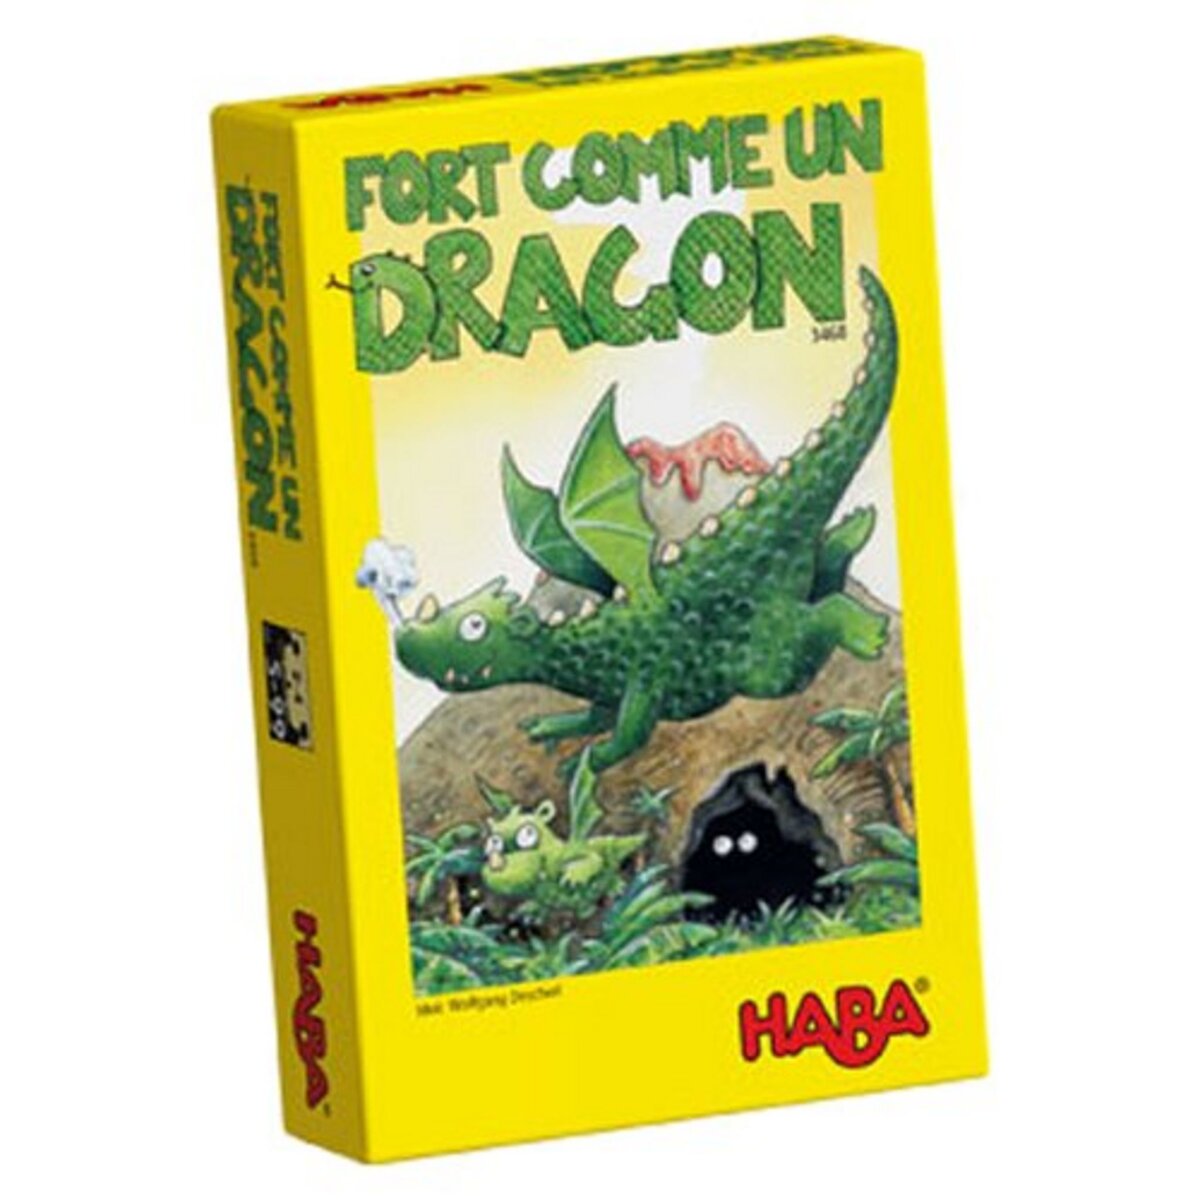 Haba Fort comme un dragon